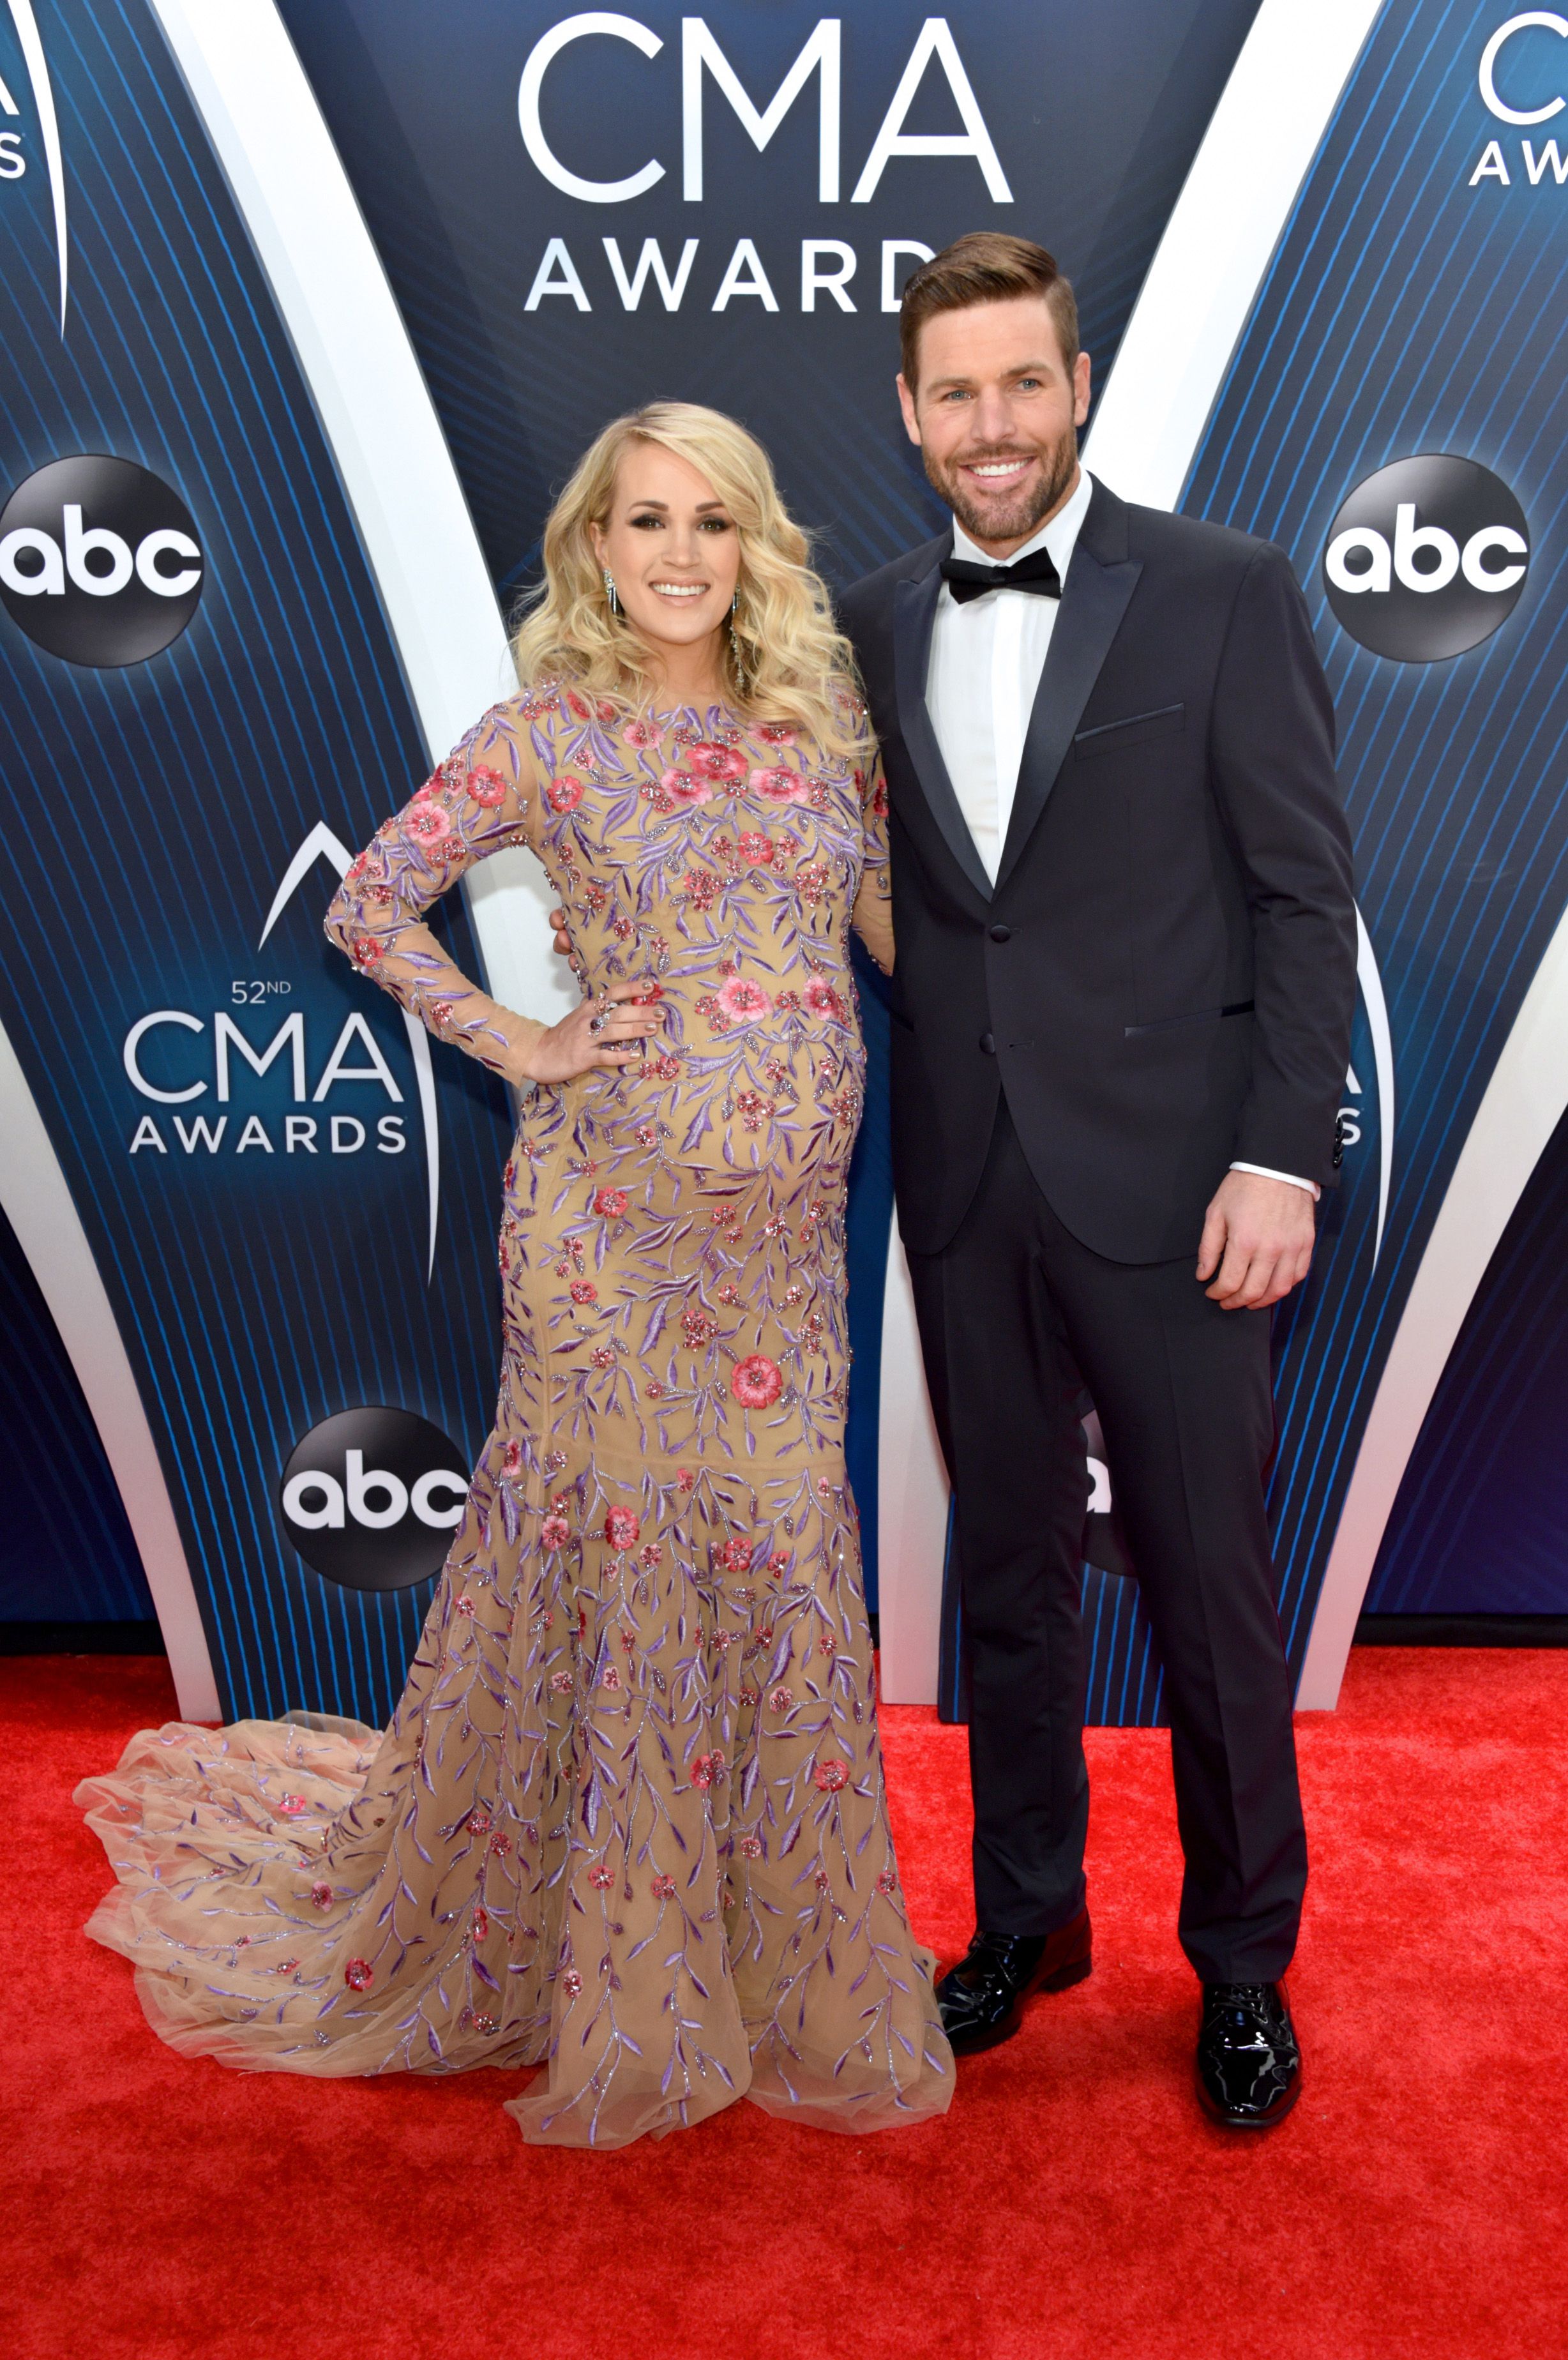 Carrie Underwood & Mike Fisher at the CMA Awards 2018